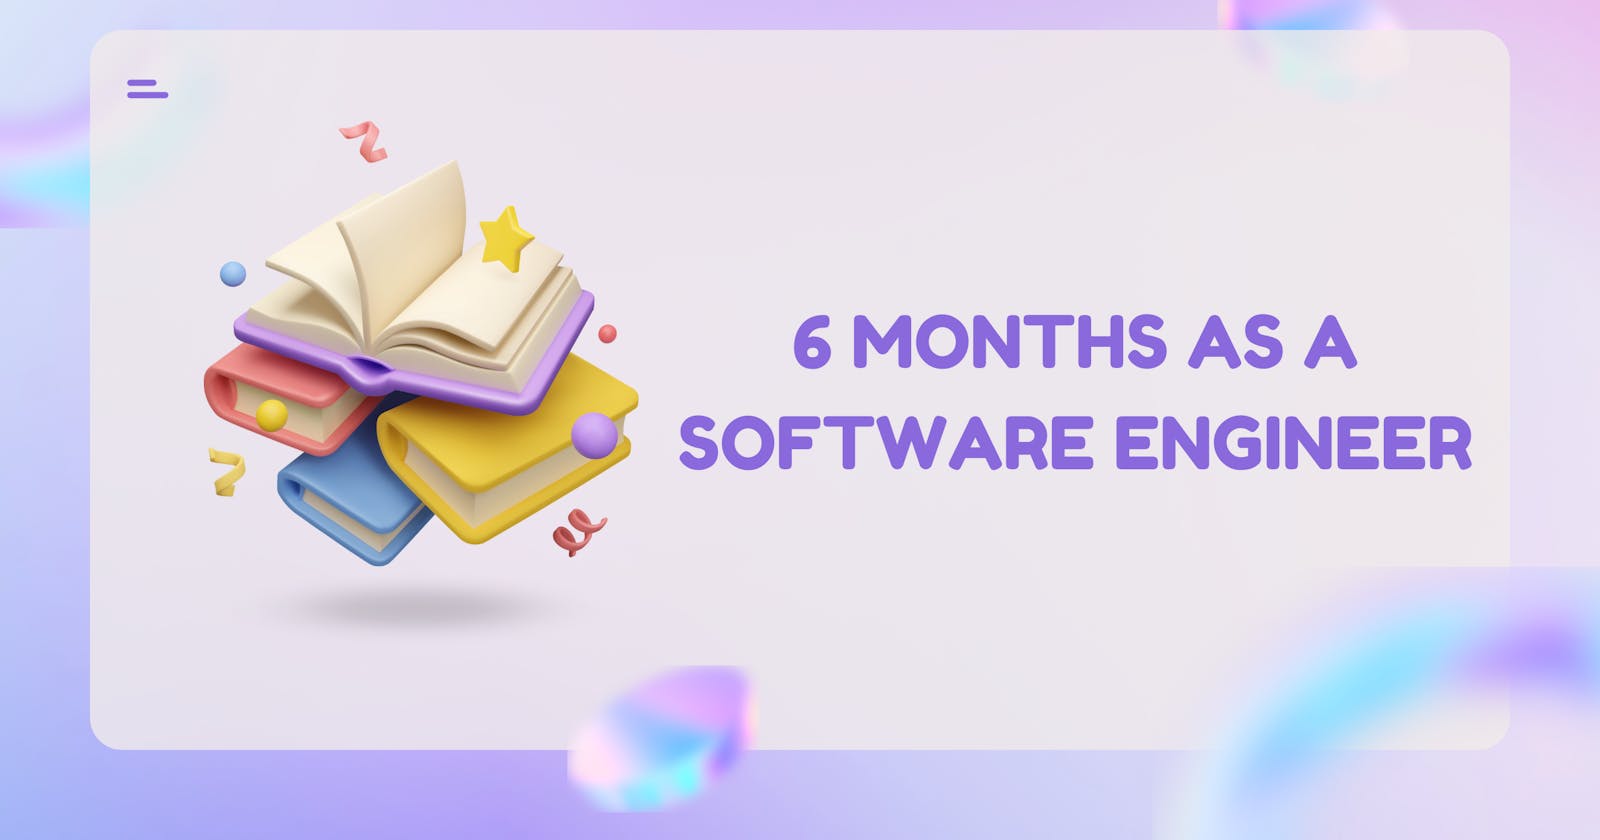 My first 6 months as a software engineer